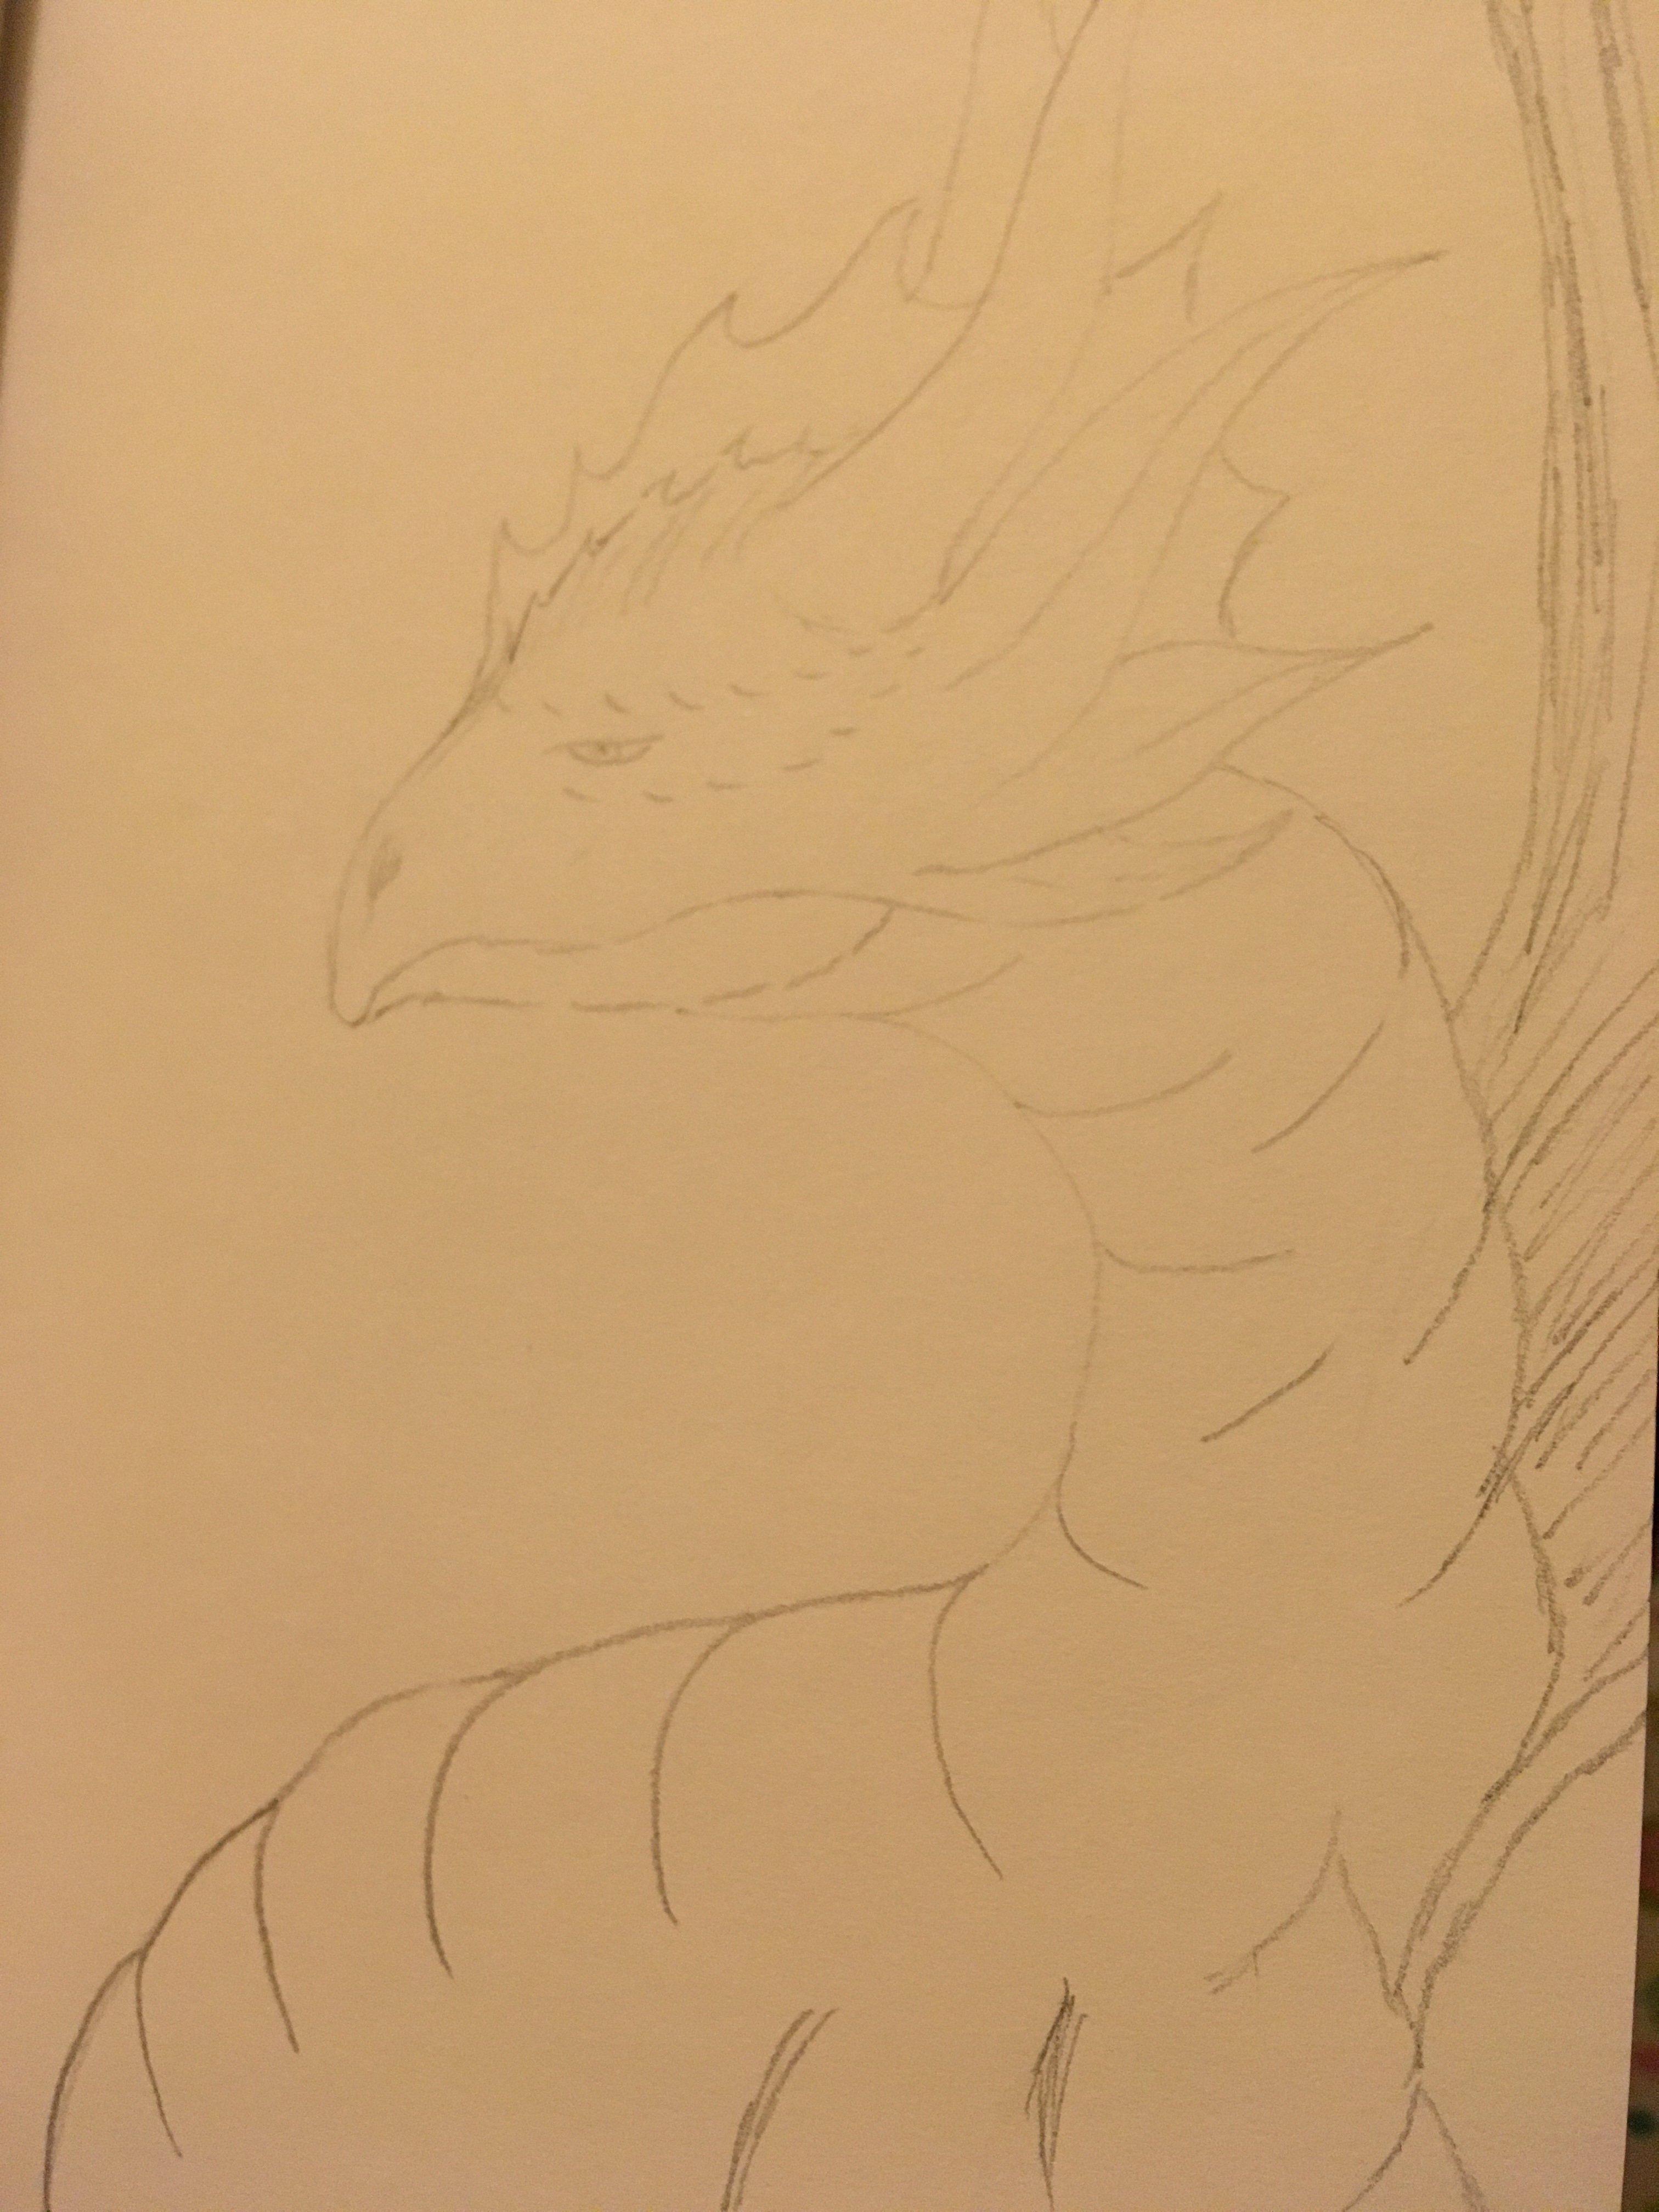 Too many tacos dragon in pencil big belly full